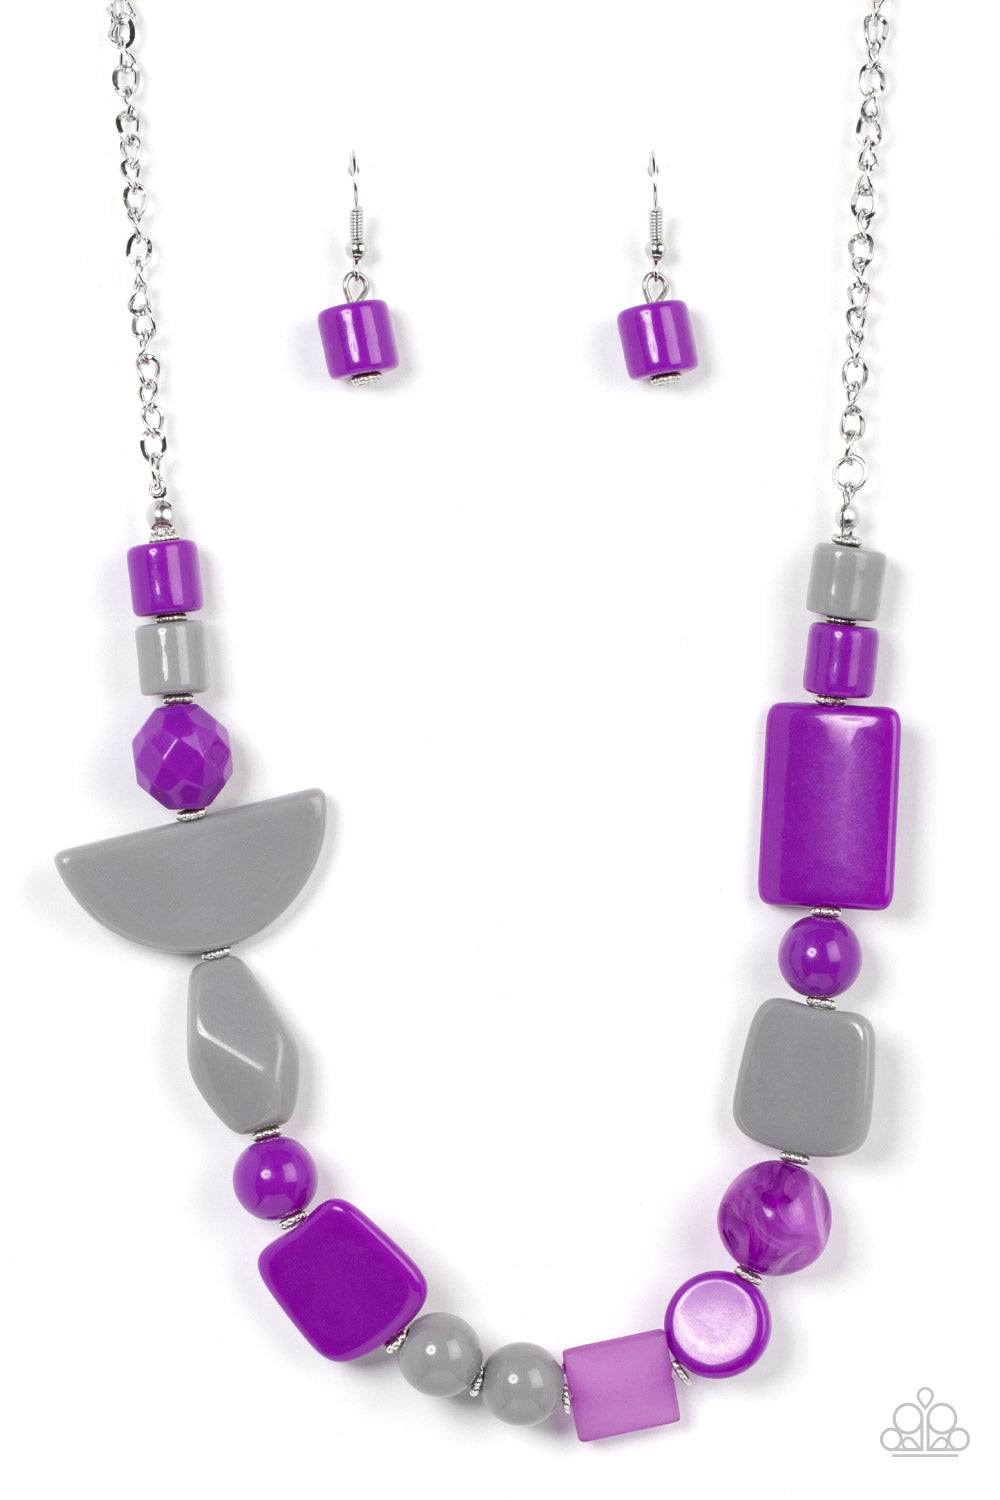 Tranquil Trendsetter Purple Necklace - Paparazzi Accessories  Featuring the bold hues of Ultimate Gray and purple, mismatched acrylic and faux rock beads are haphazardly threaded along an invisible wire below the collar for an abstract artisan vibe. Features an adjustable clasp closure.  Sold as one individual necklace. Includes one pair of matching earrings.